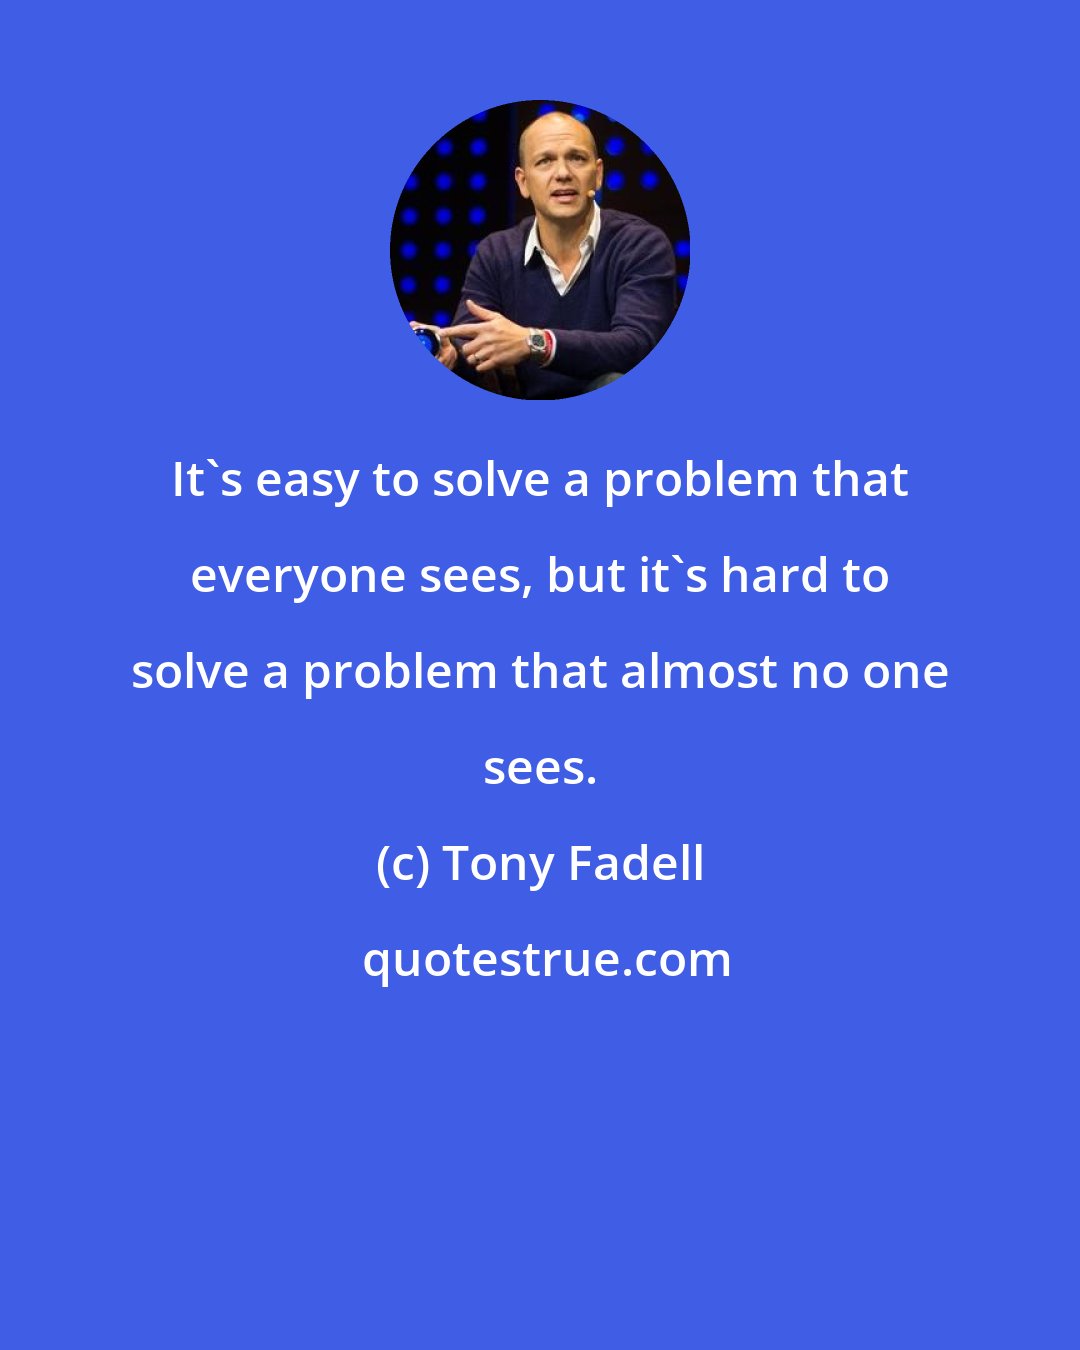 Tony Fadell: It's easy to solve a problem that everyone sees, but it's hard to solve a problem that almost no one sees.